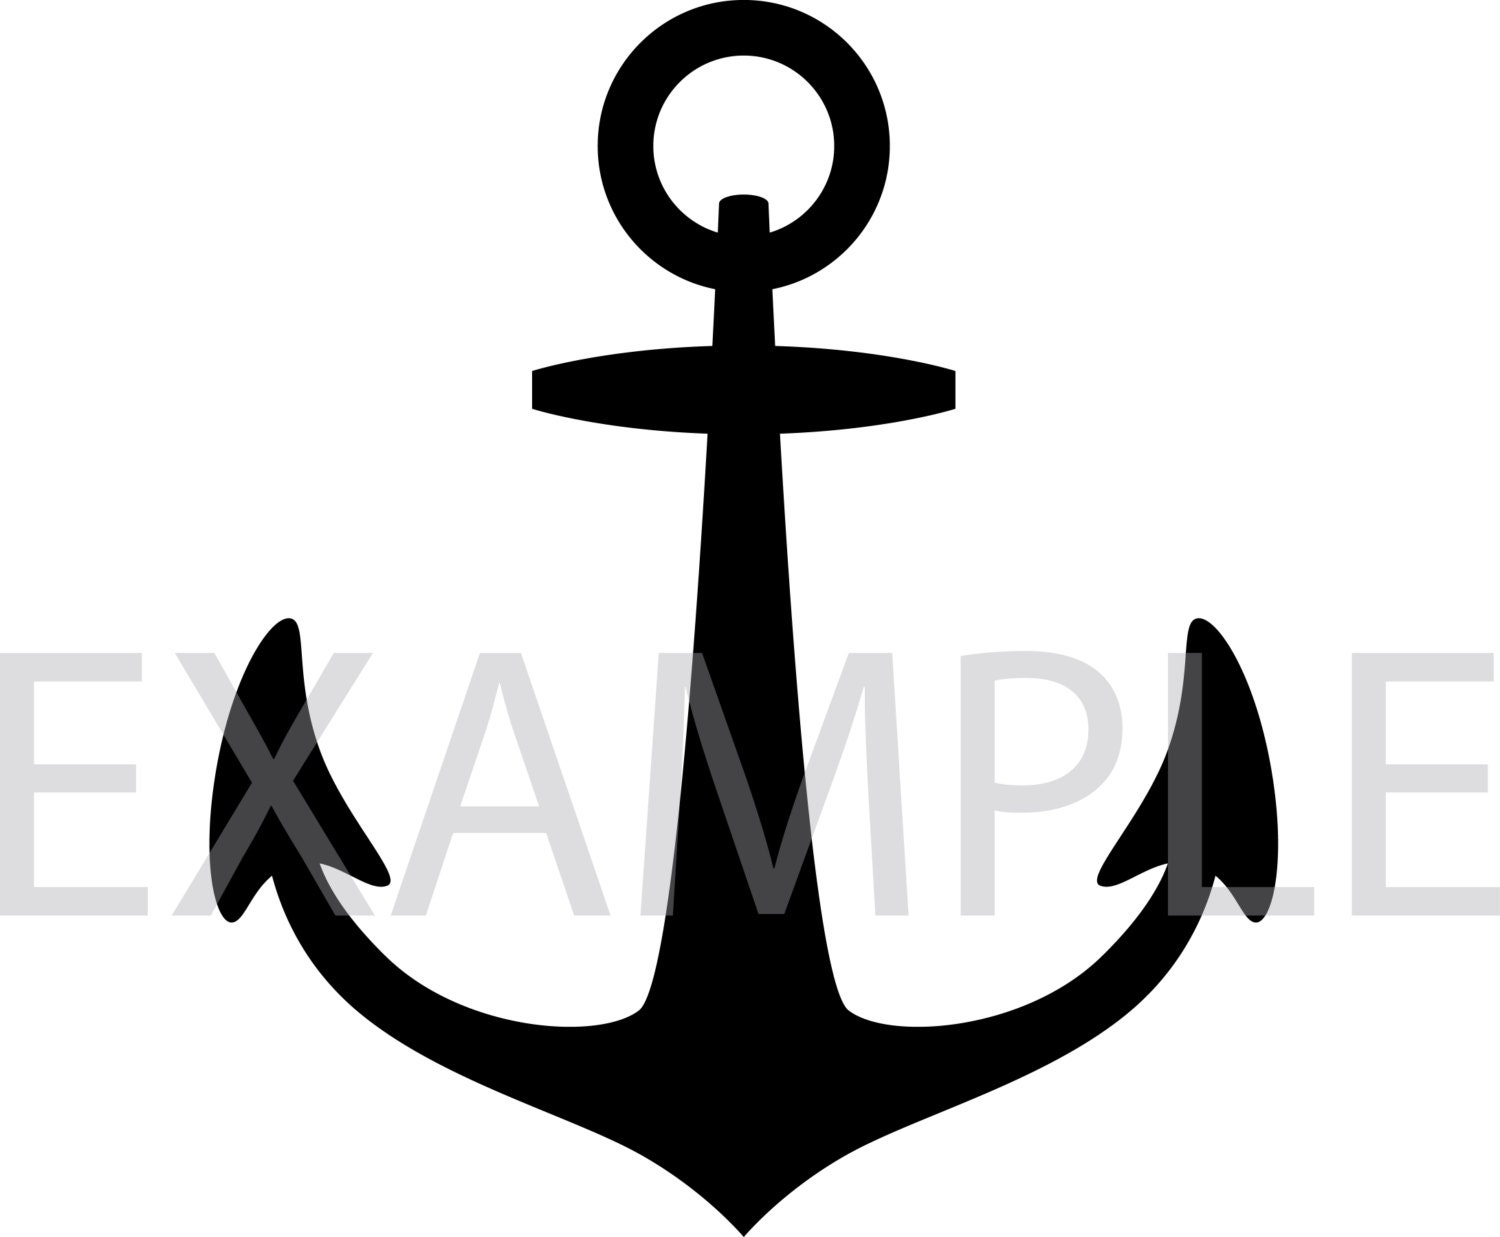 Download Anchor Ver.1 - Digital Cutting Files, Svg Eps Png Dxf ...